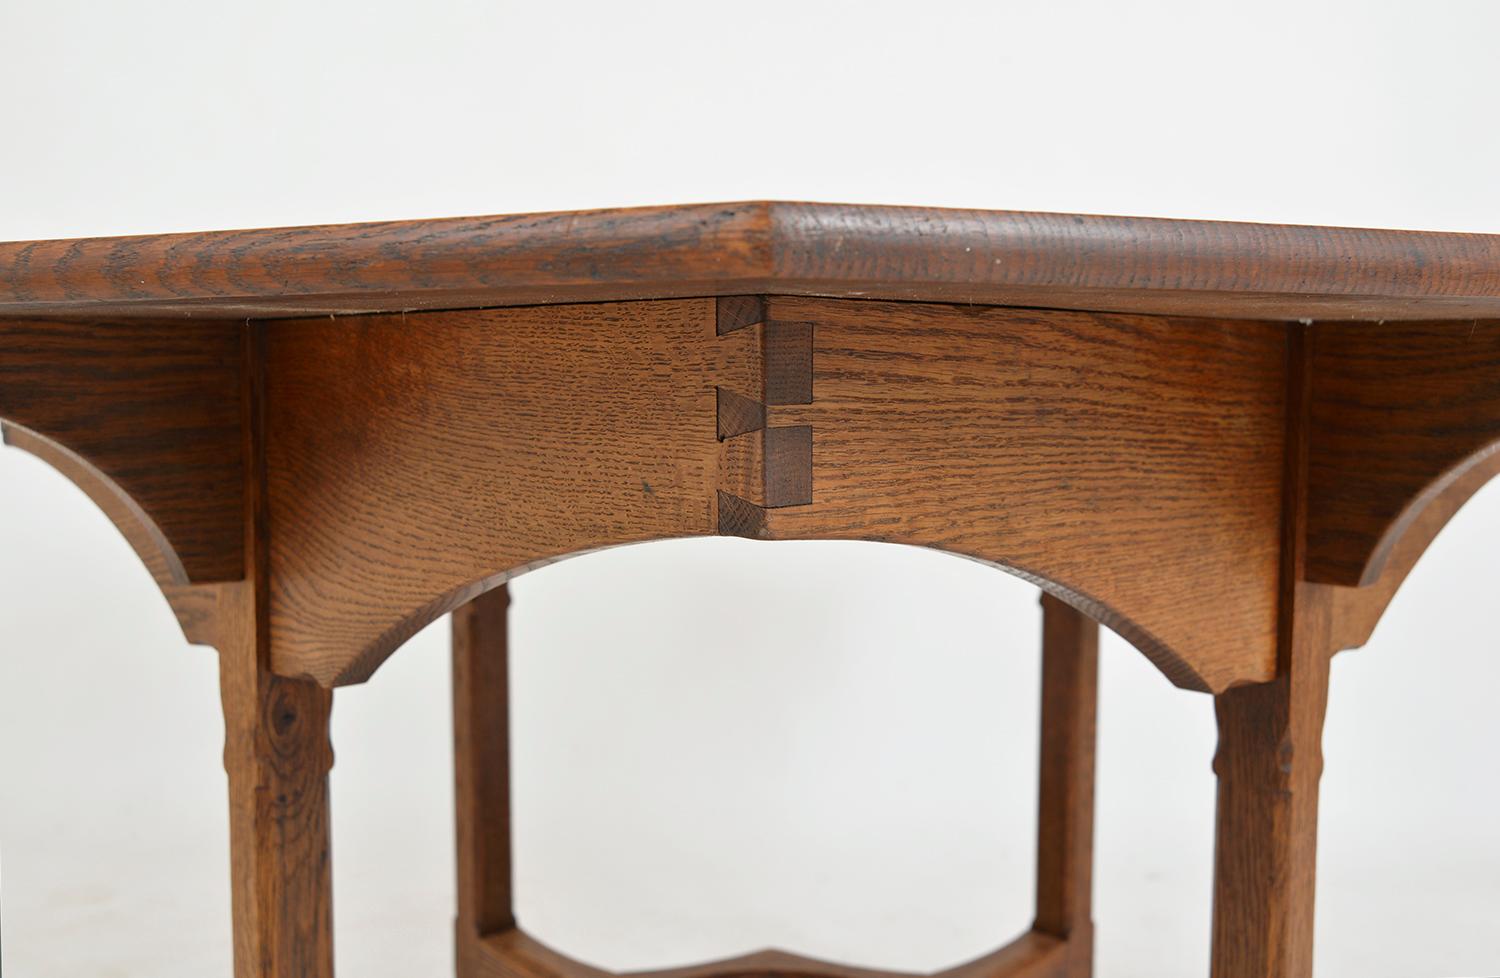 20th Century English Oak Gordon Russell Arts & Crafts Octagonal Table Dining Cotswold School